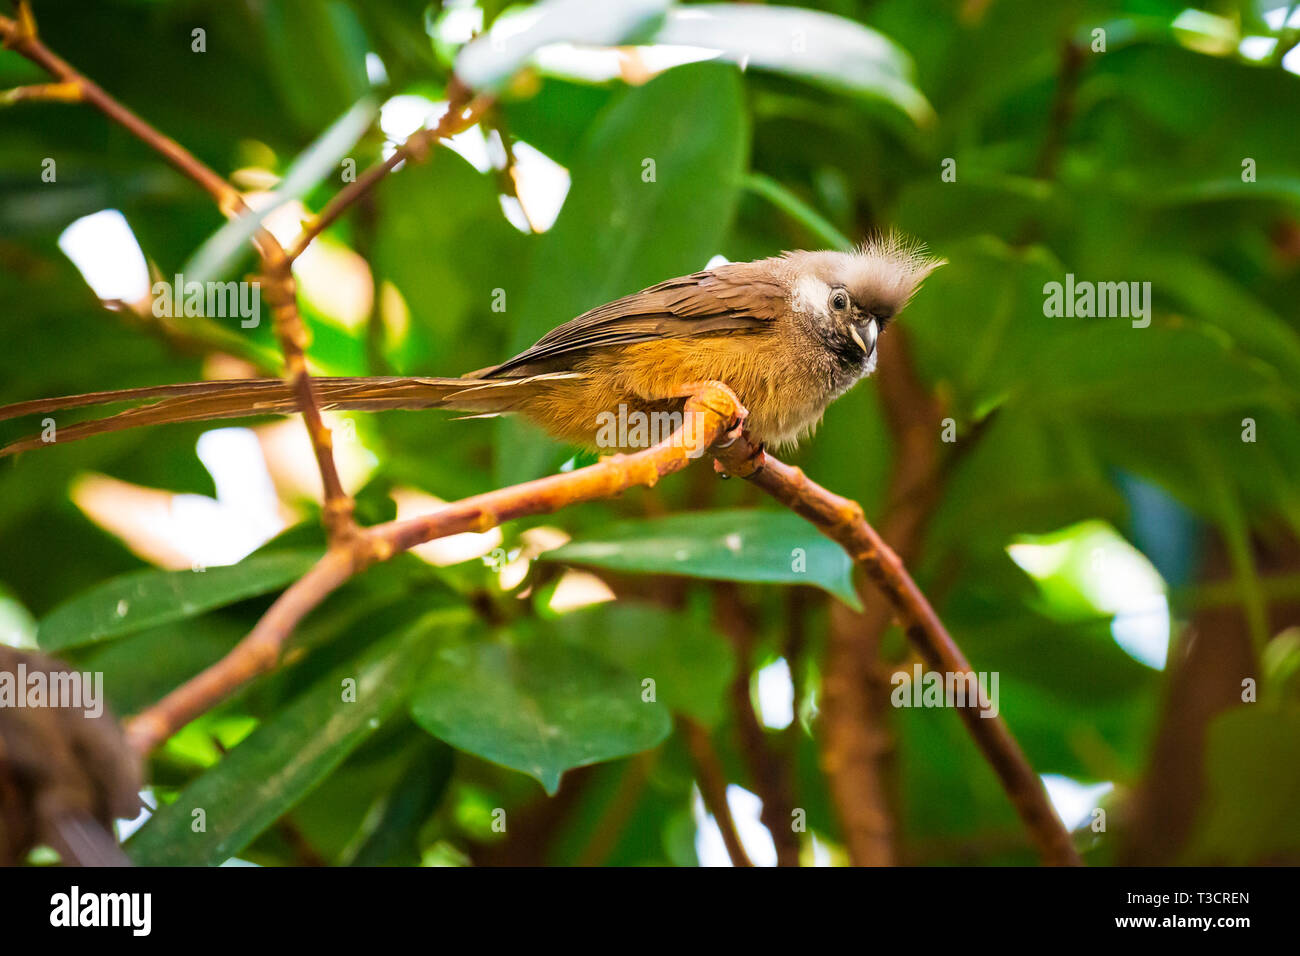 Closeup of a Speckled mousebird Colius striatus perched in a tropical forest Stock Photo